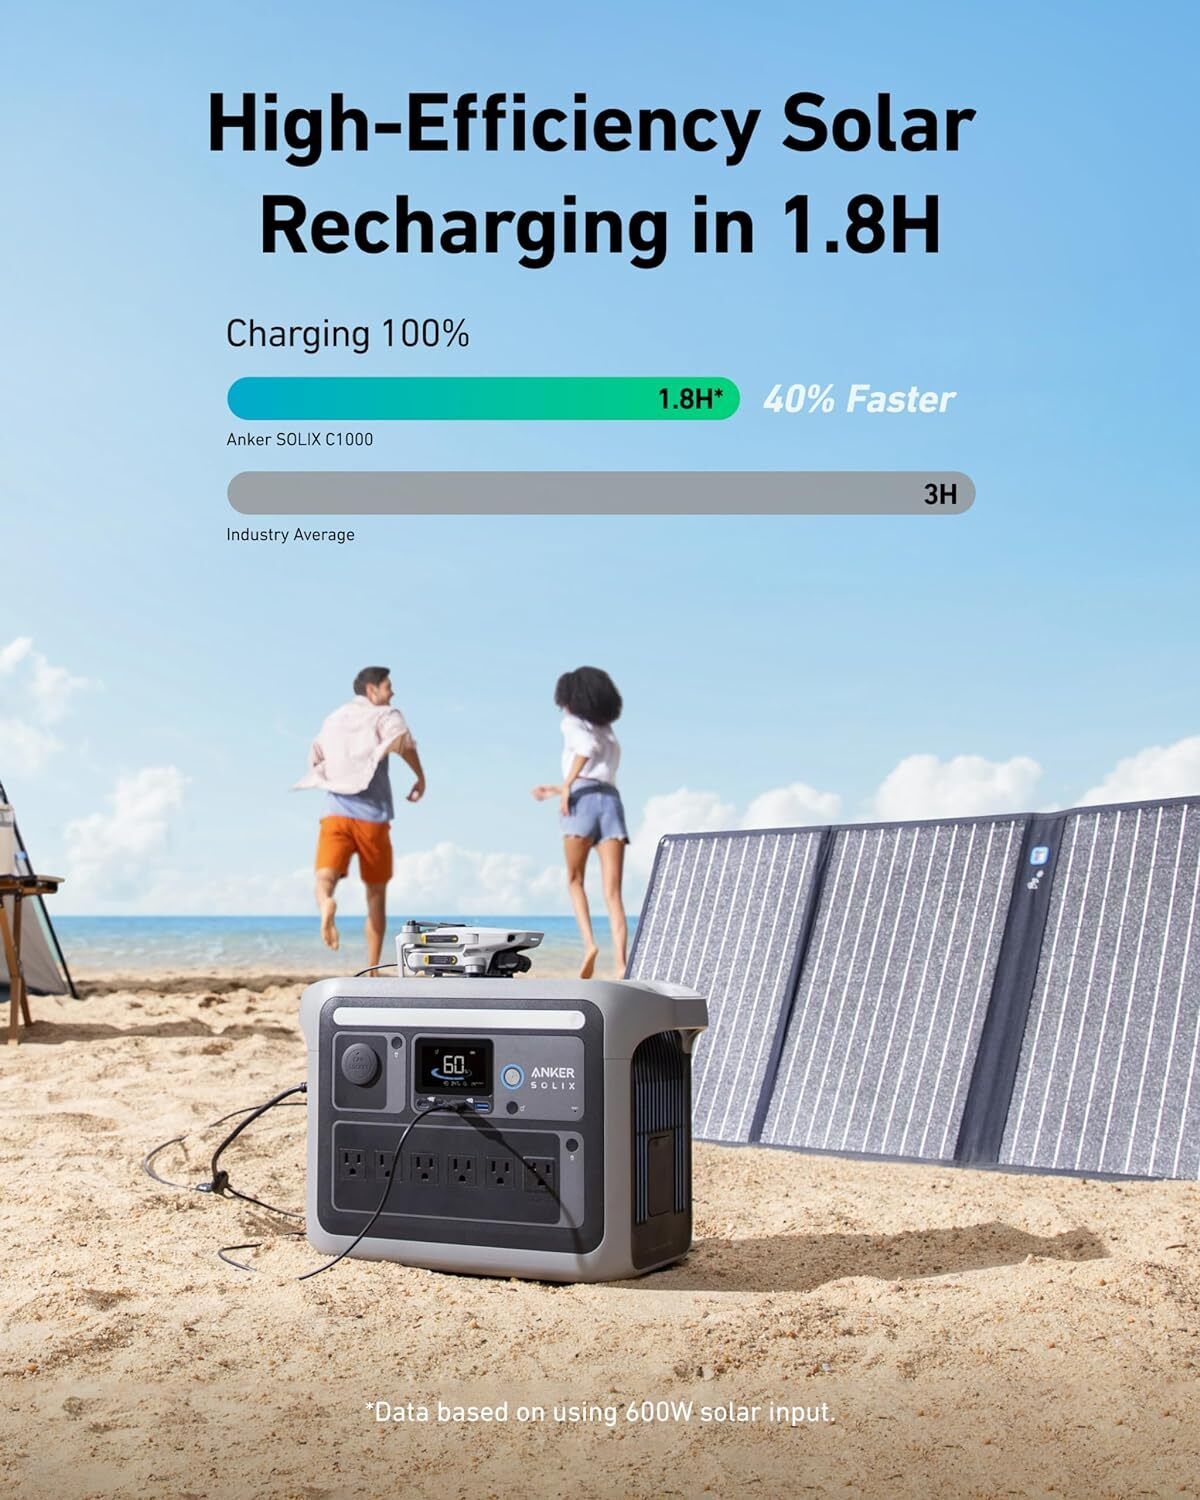 Anker Play Anker SOLIX C1000 Portable Power Station Generator +100W Solar Panel for Outdoor